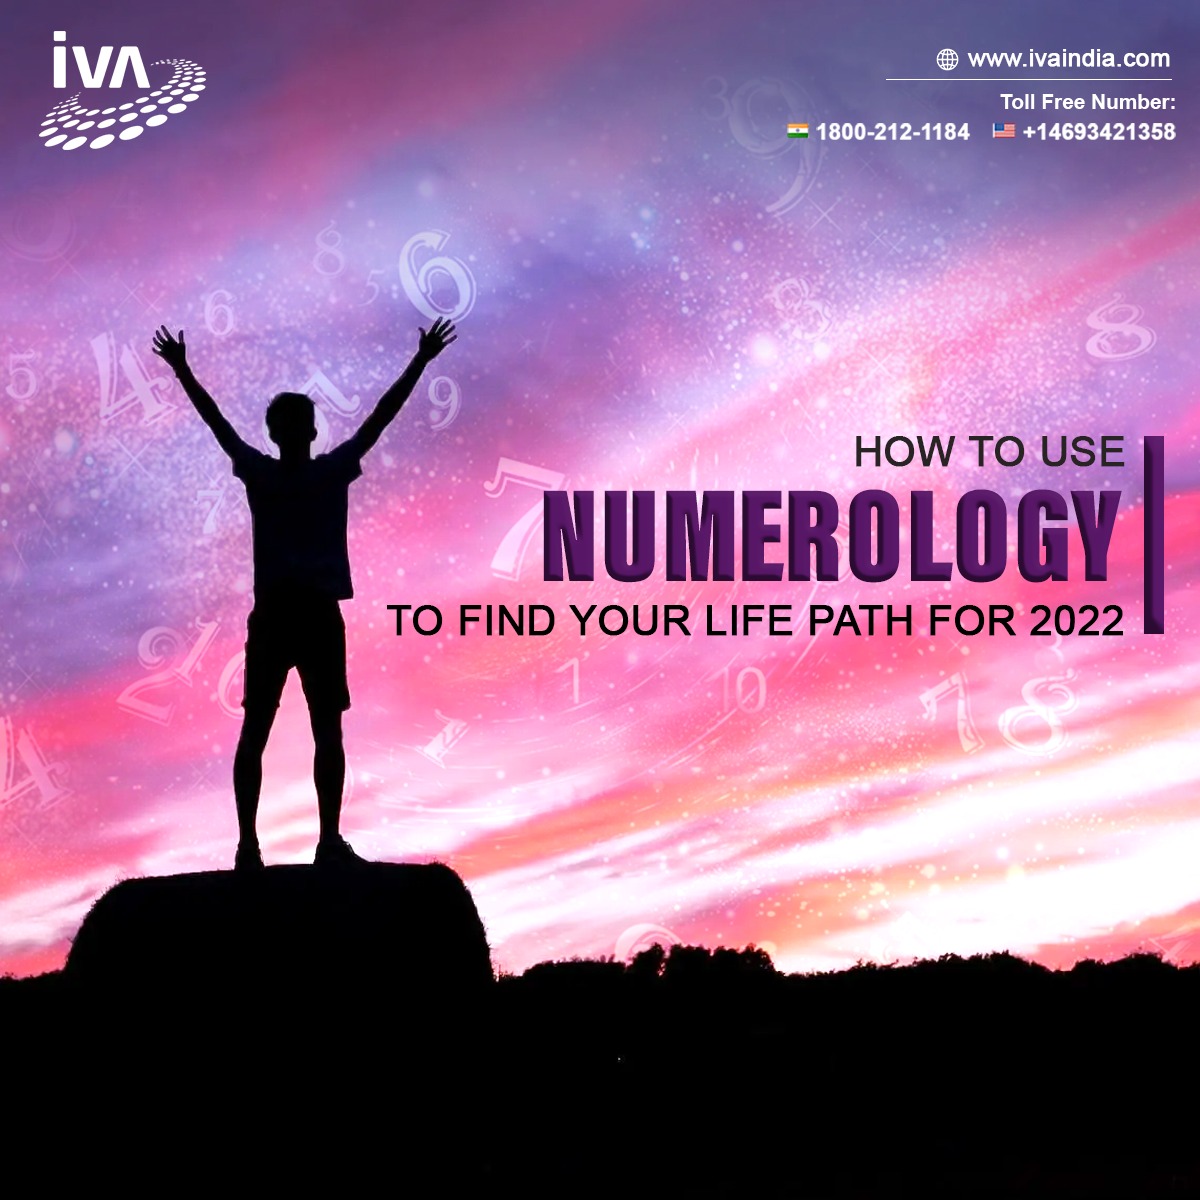 How To Use Numerology To Find Your Life Path For 2022